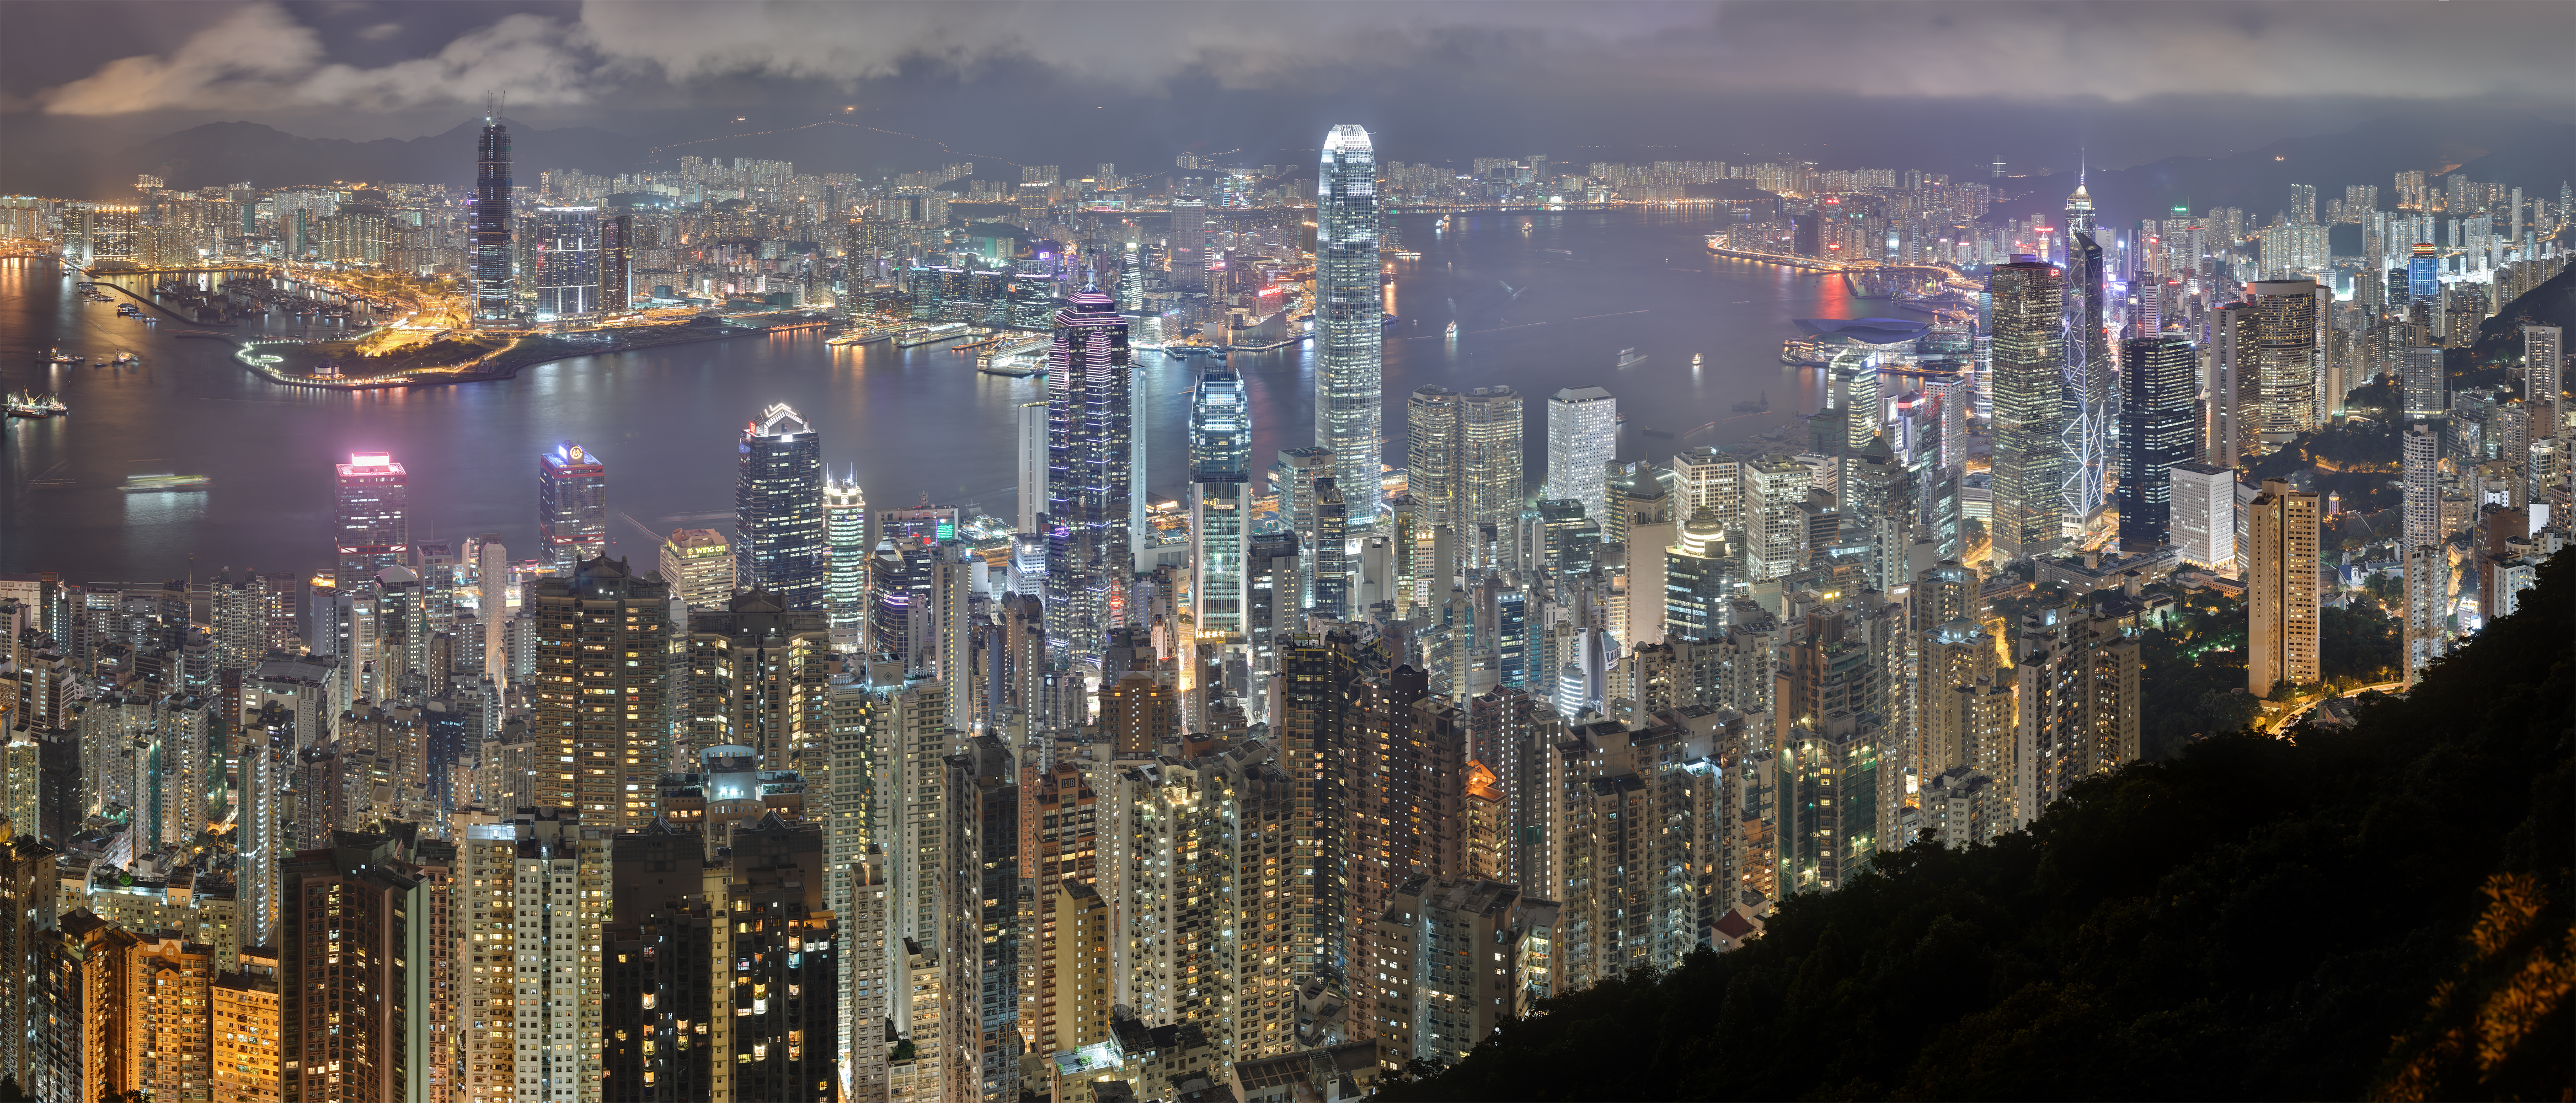 Panoramic view of the Hong Kong night skyline, 2008. Photo credit: Base64, retouched by Carol Spears. Licensed under the Creative Commons Attribution-Share Alike 3.0 Unported license.